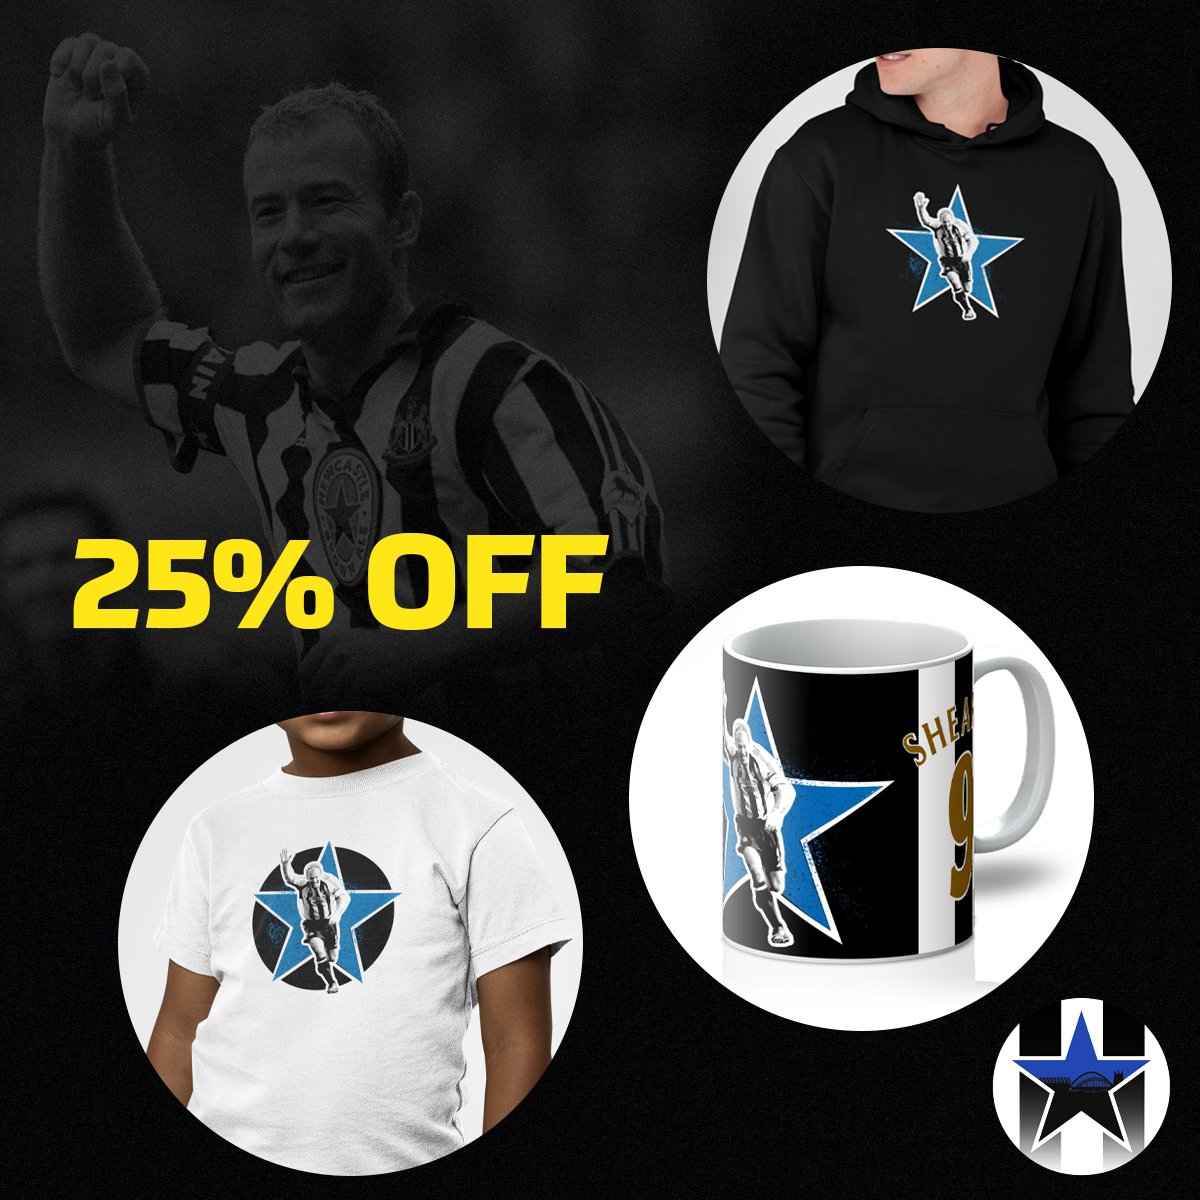 To mark the anniversary of @alanshearer's retirement from football, we have an exclusive deal only available until midnight 👀 25% OFF ALL ALAN SHEAERER MERCH ⚫⚪ Don't miss out! Shop here 👉 toonarmy.com/sale #NUFC